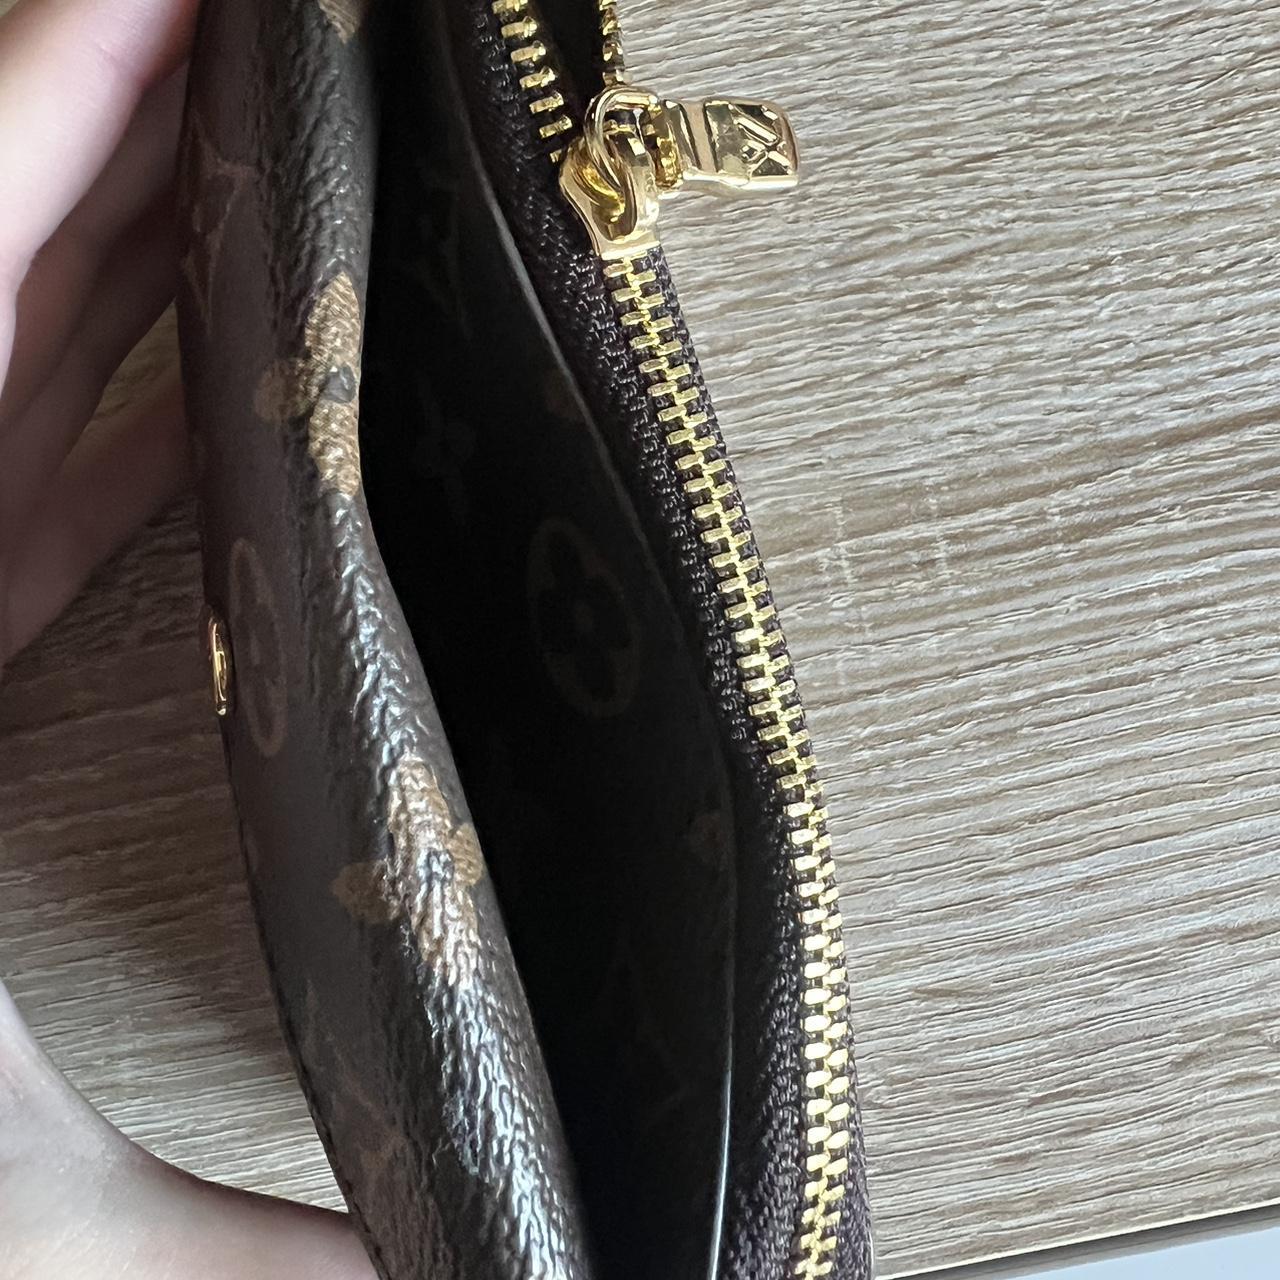 LV Small key chain/wallet “Recto Verso”. Don’t use